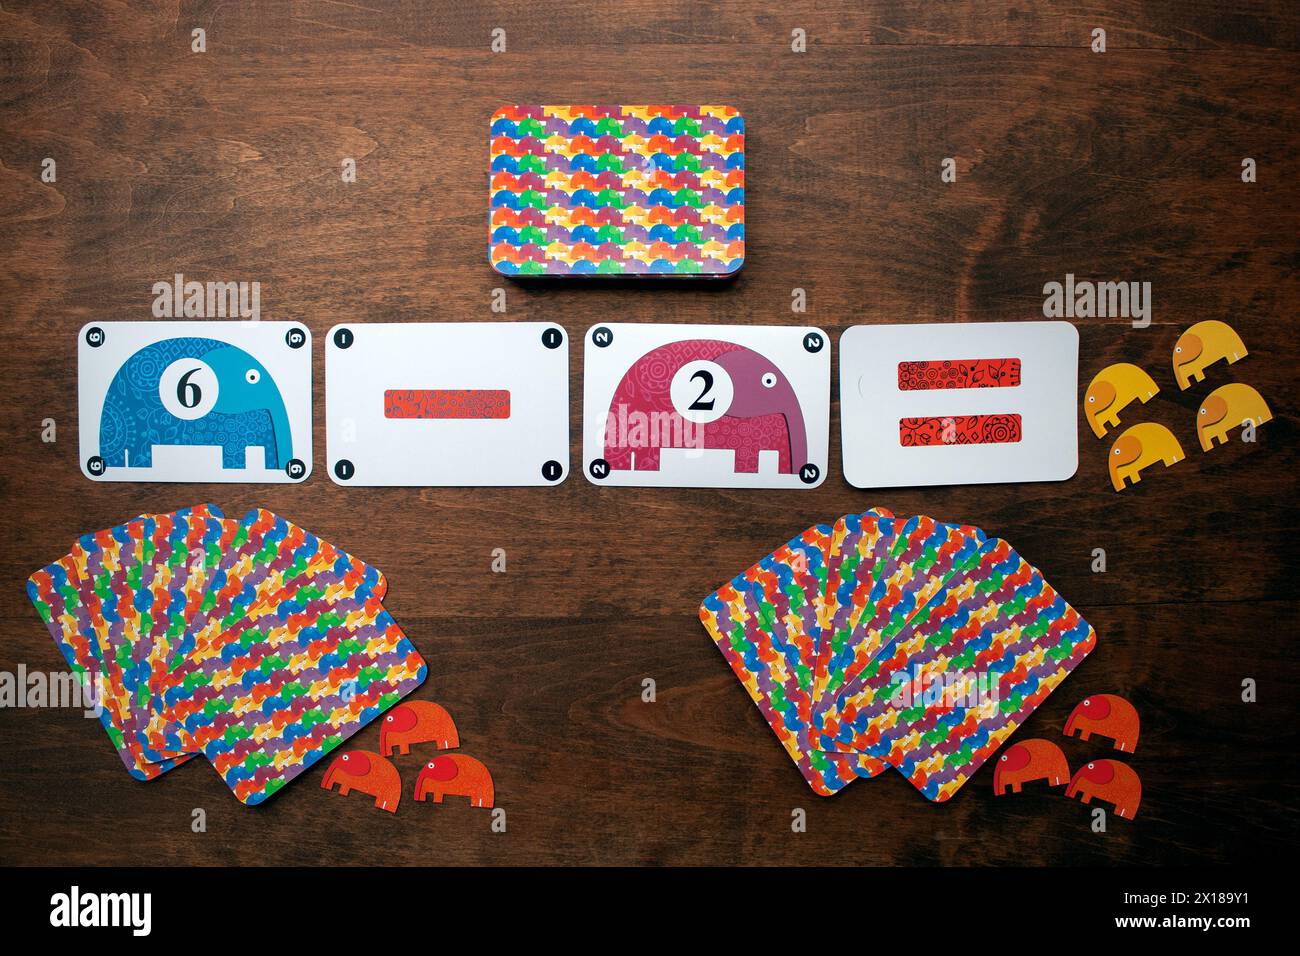 Minsk, Belarus - 24 October 2014: Djeco math board game. Cards with mathematical signs, numbers and elephants on a wooden table Stock Photo